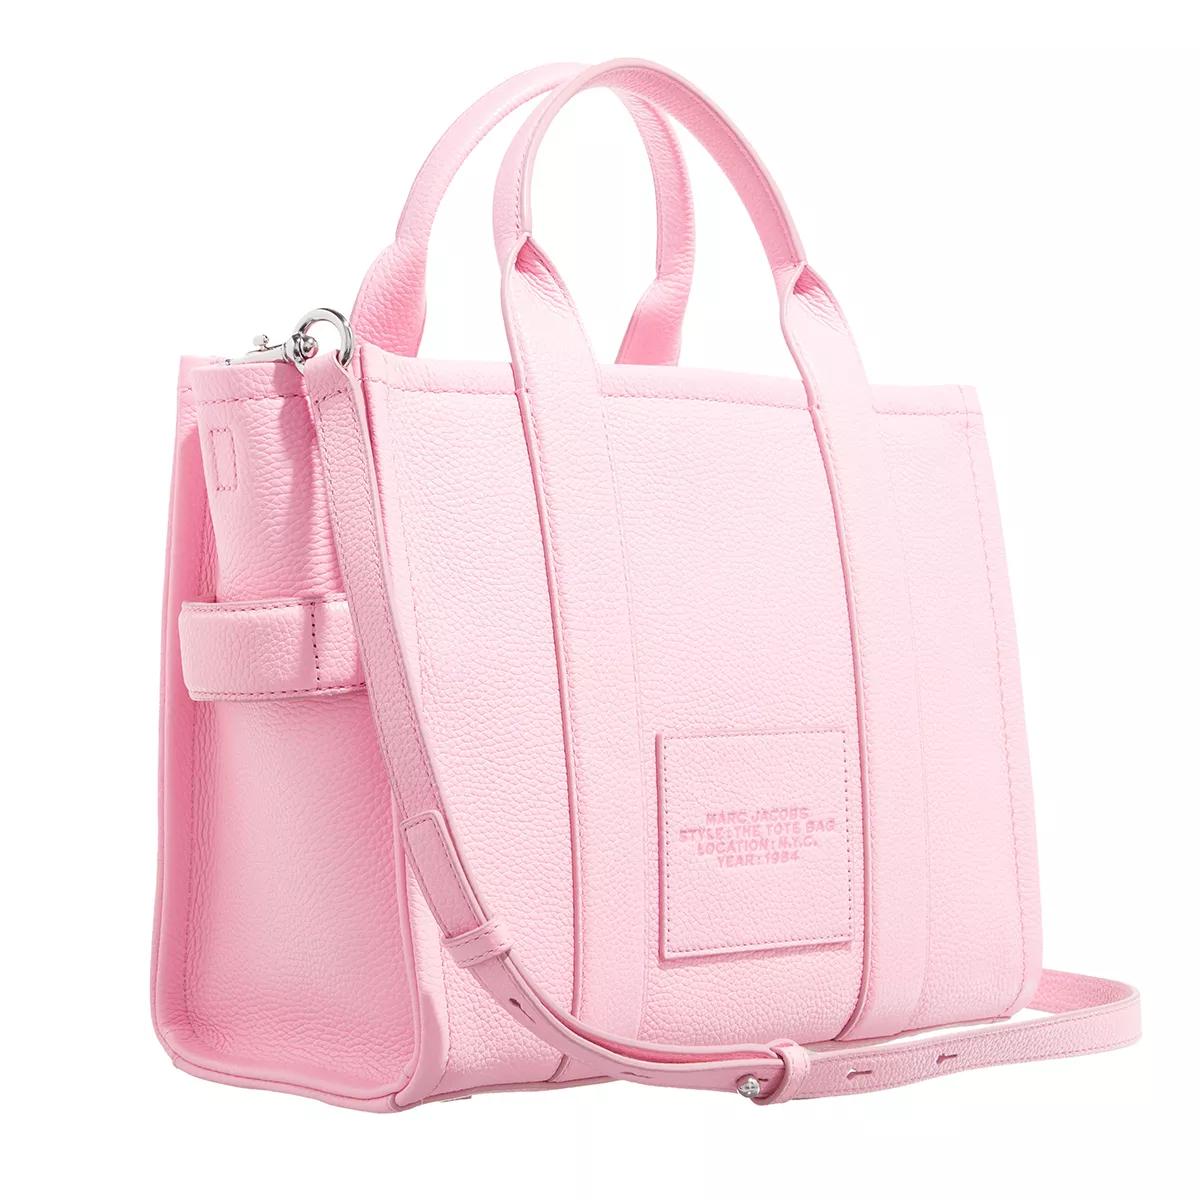 The Tote Bag in Candy Pink! Ordered from the Marc Jacobs website